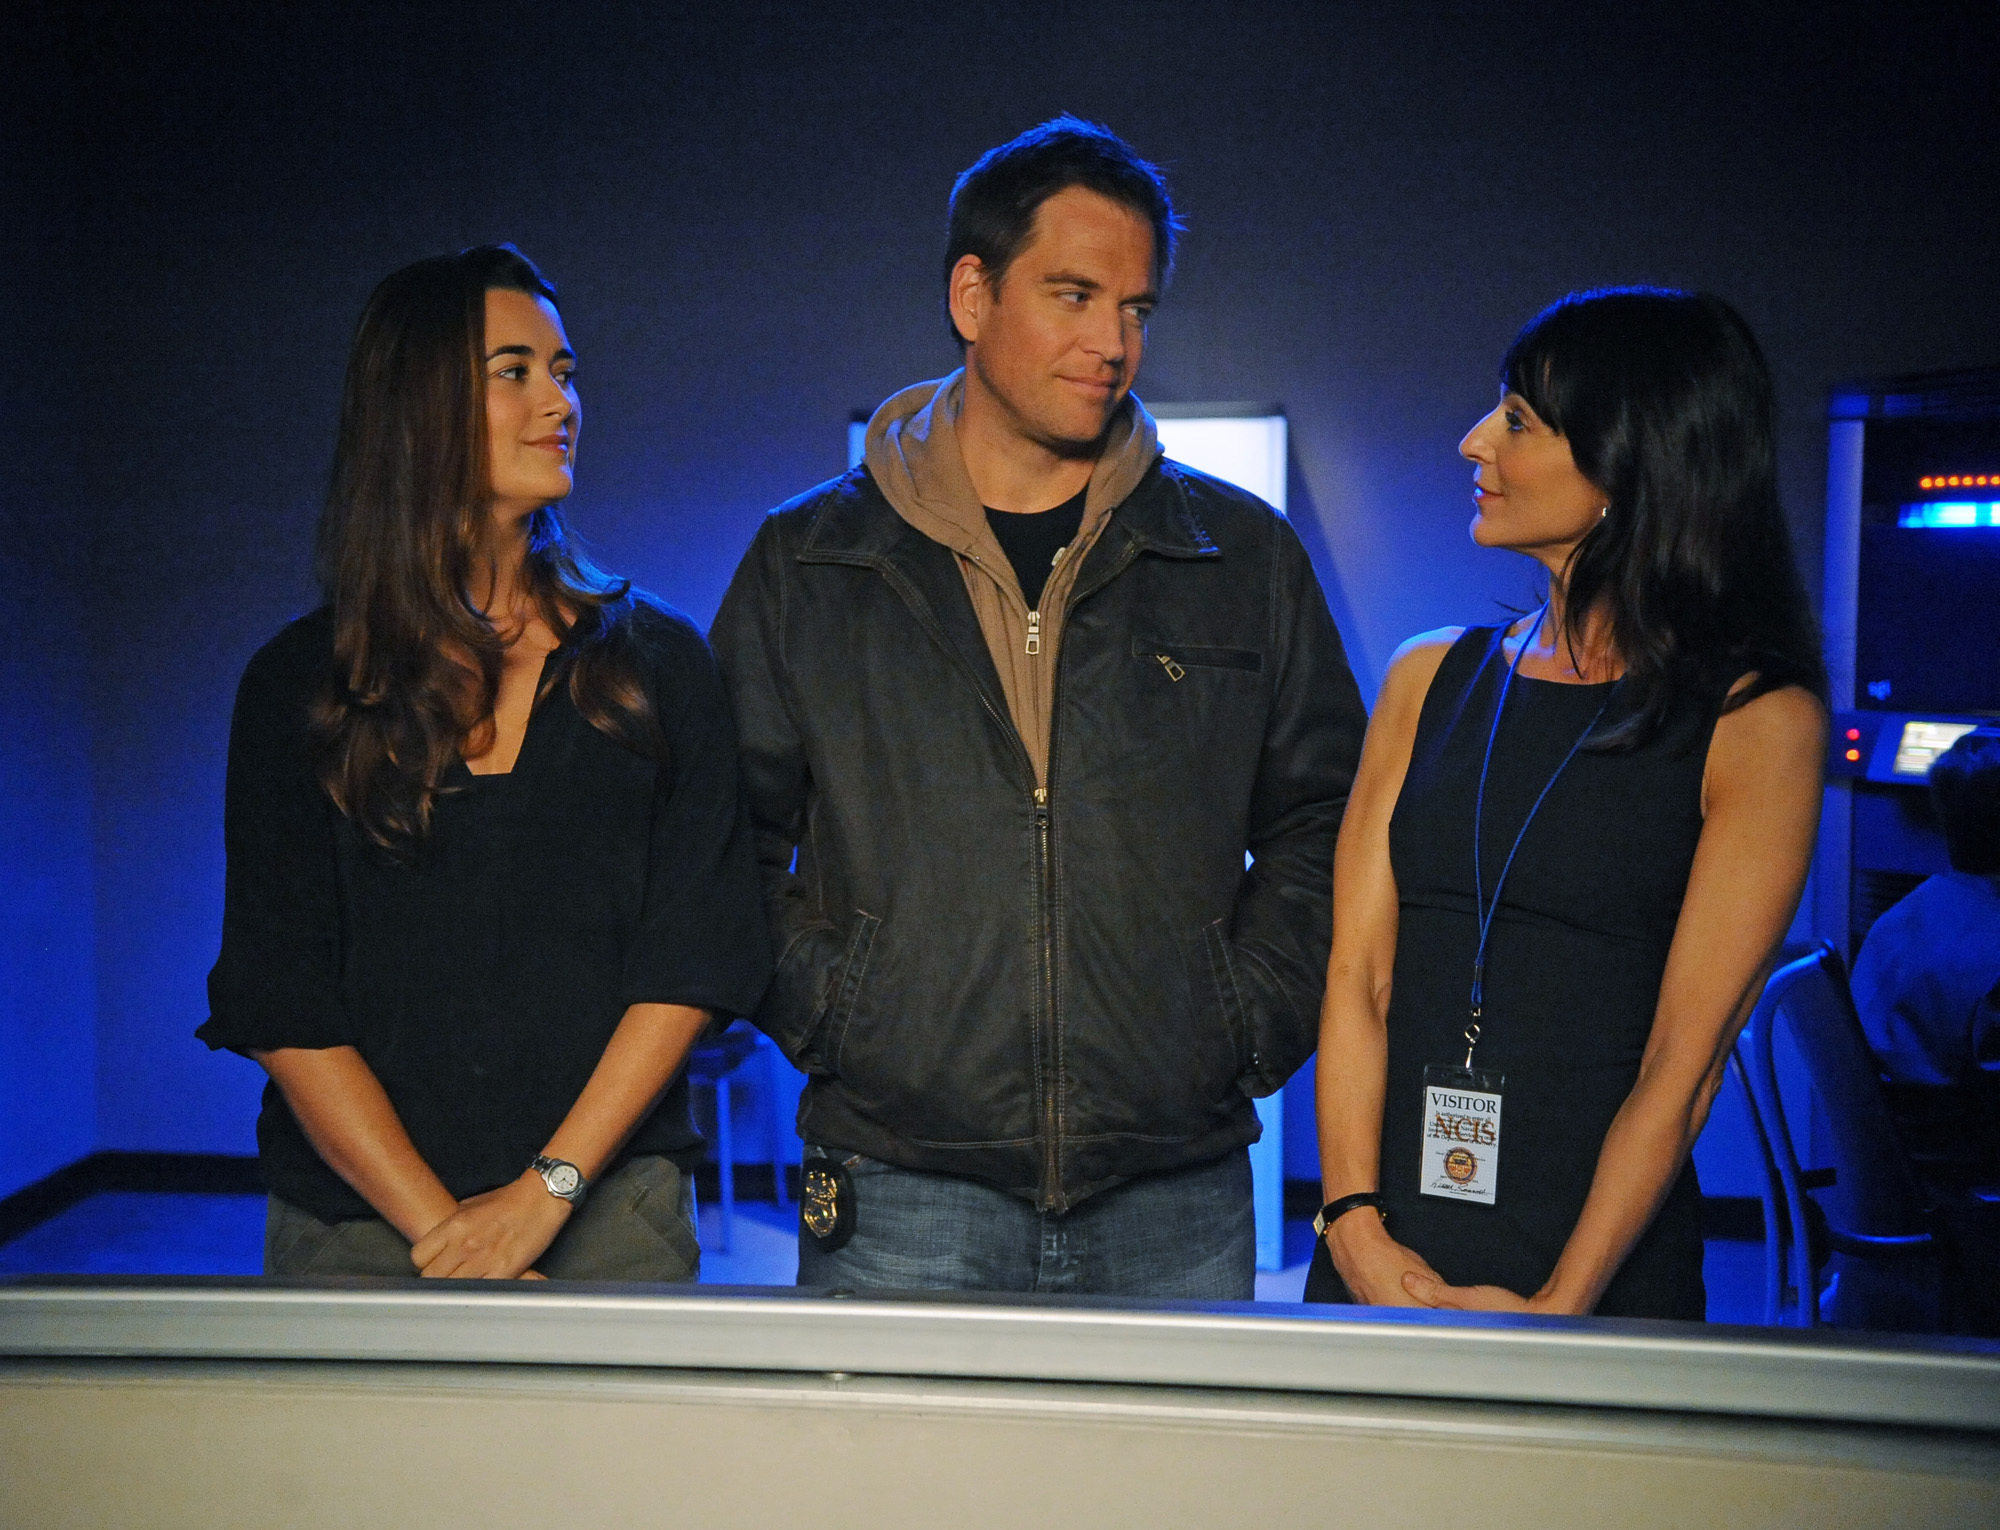 Still of Perrey Reeves, Michael Weatherly and Cote de Pablo in NCIS: Naval Criminal Investigative Service (2003)